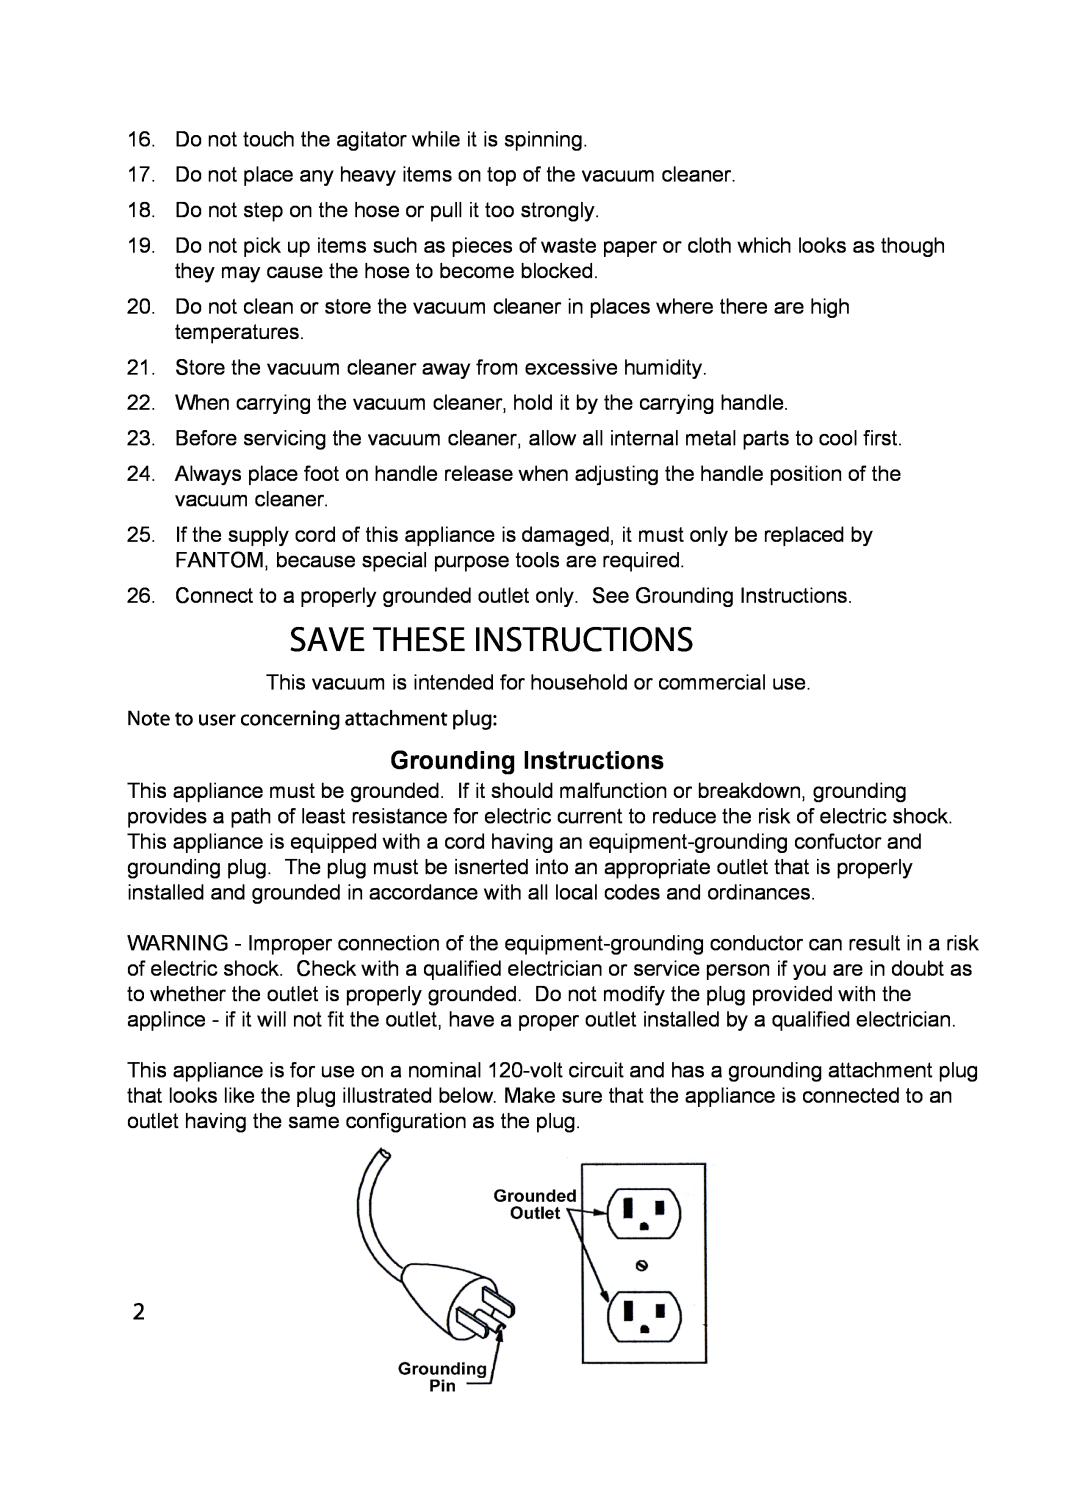 Fantom Vacuum FM744H Save These Instructions, Grounding Instructions, Note to user concerning attachment plug 